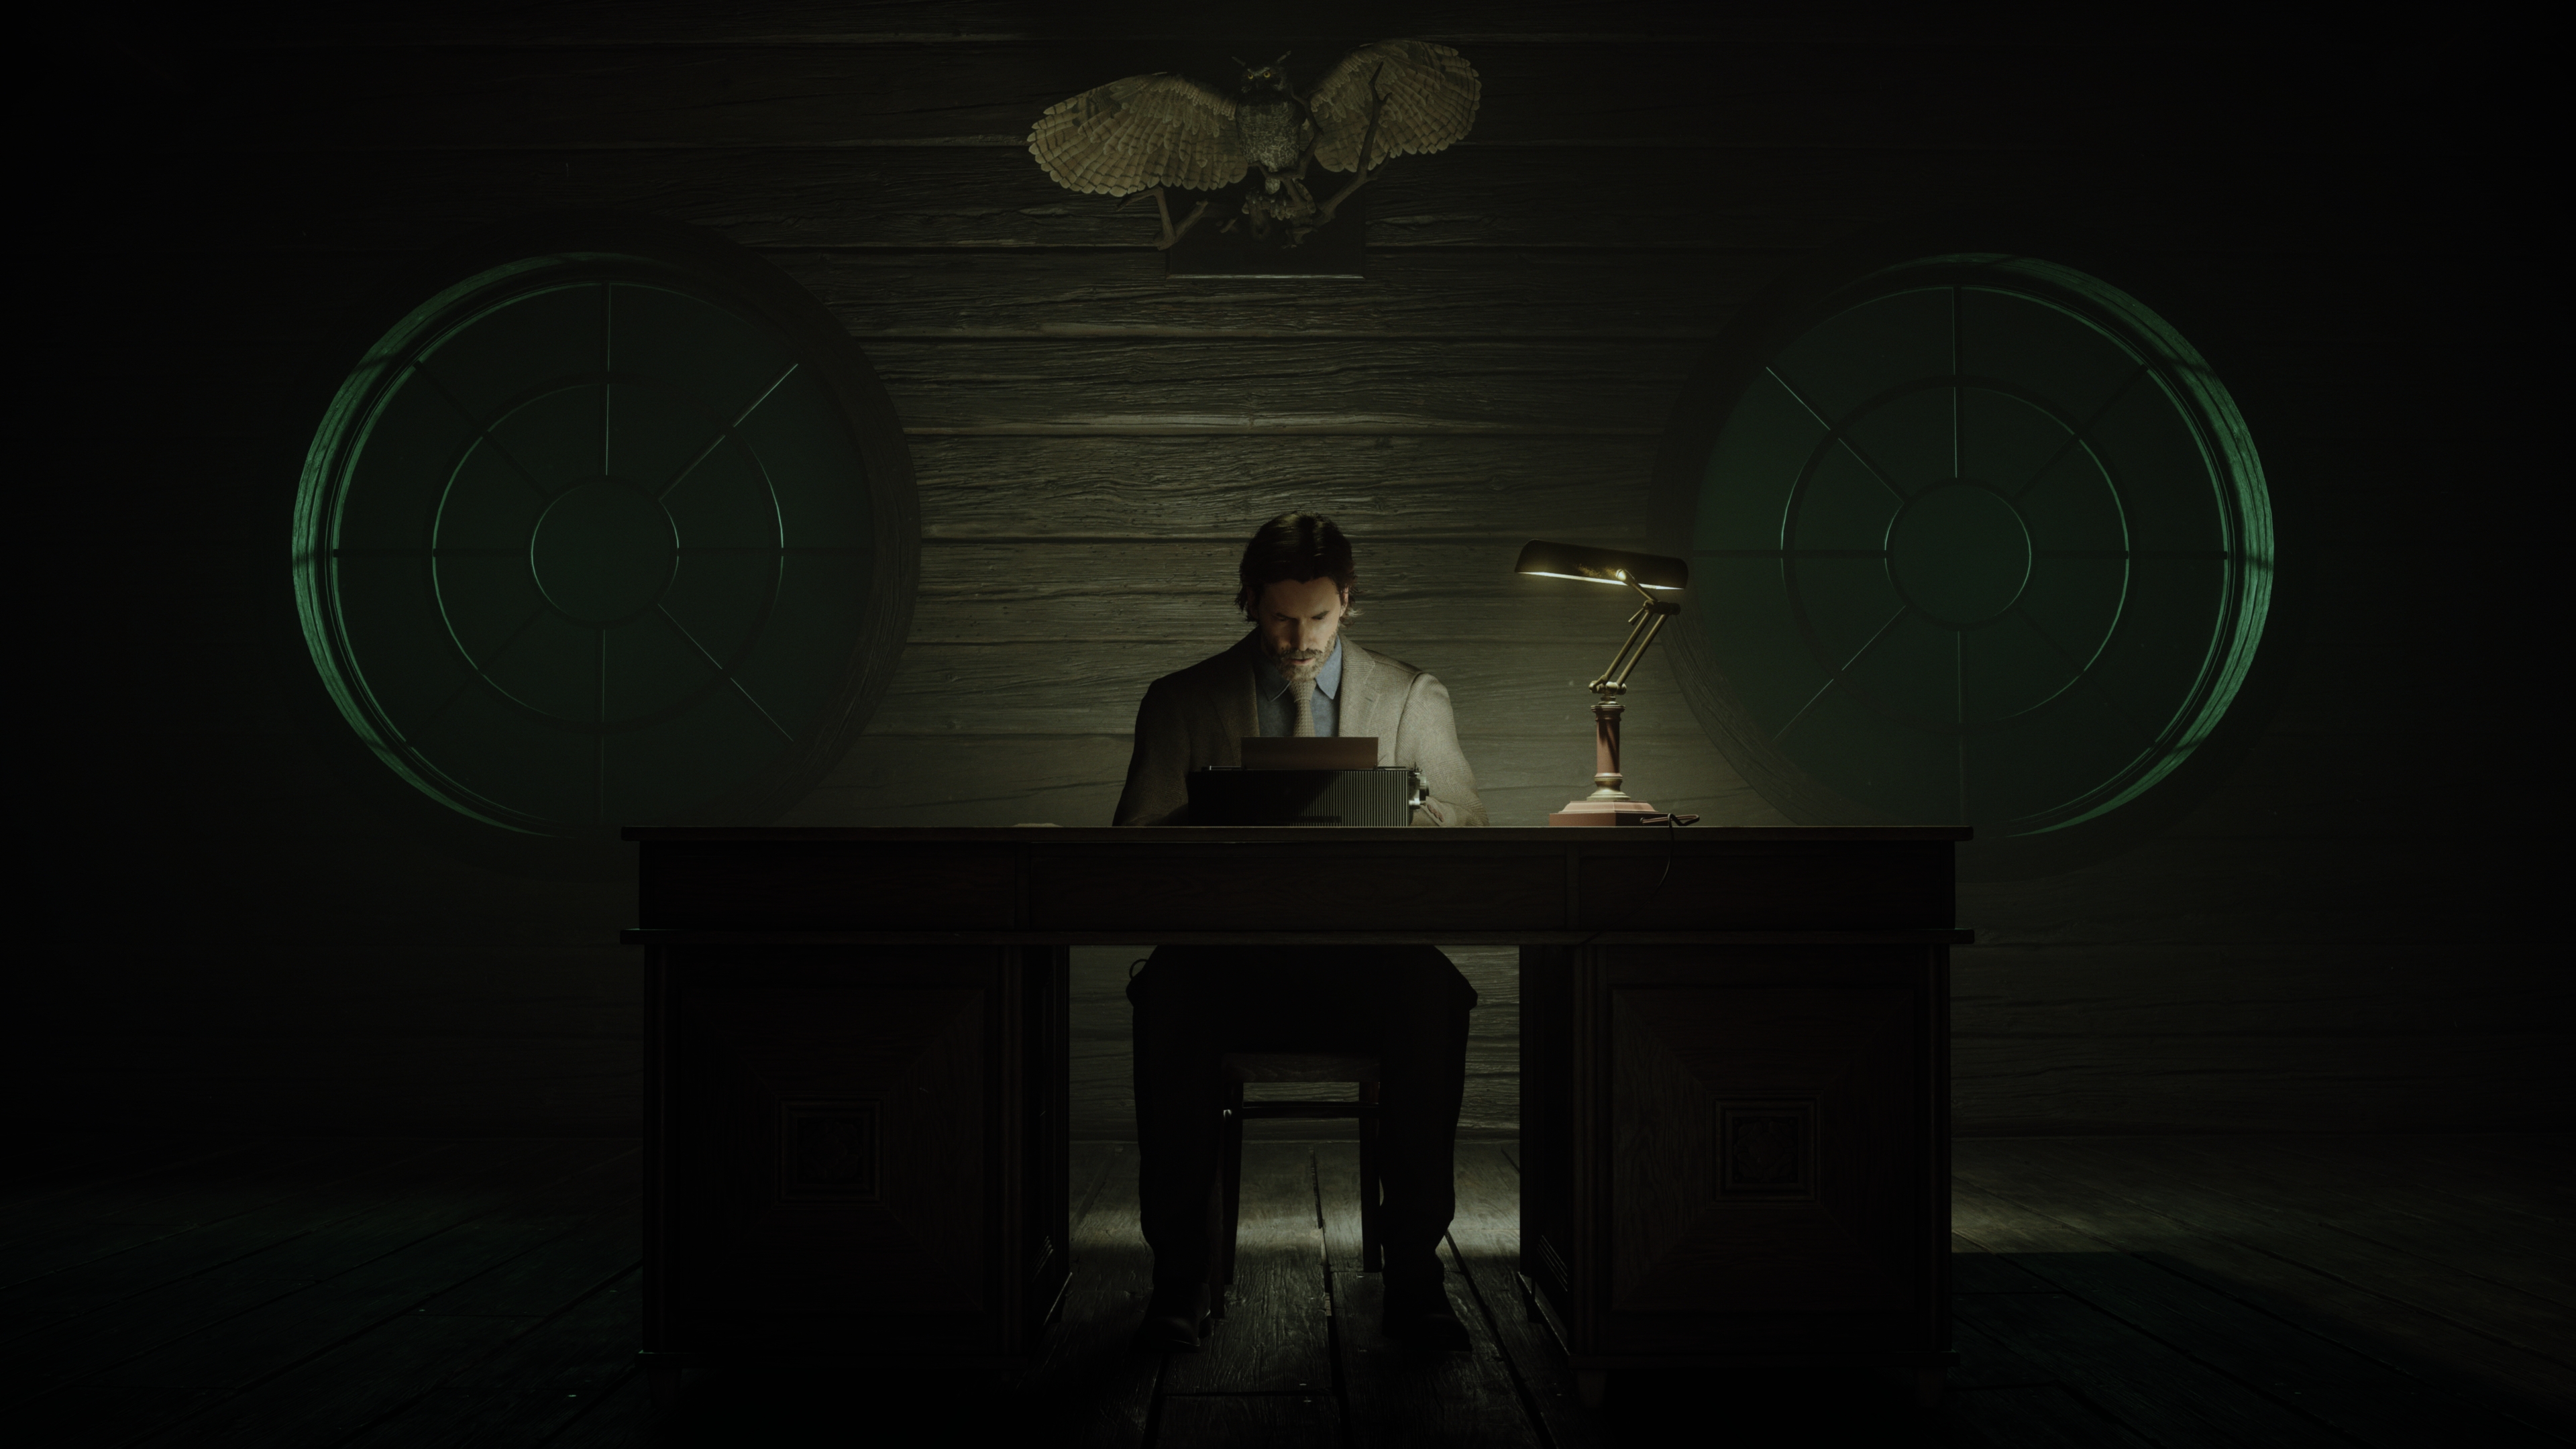 Alan Wake is a lost writer trapped in the nightmarish Dark Place